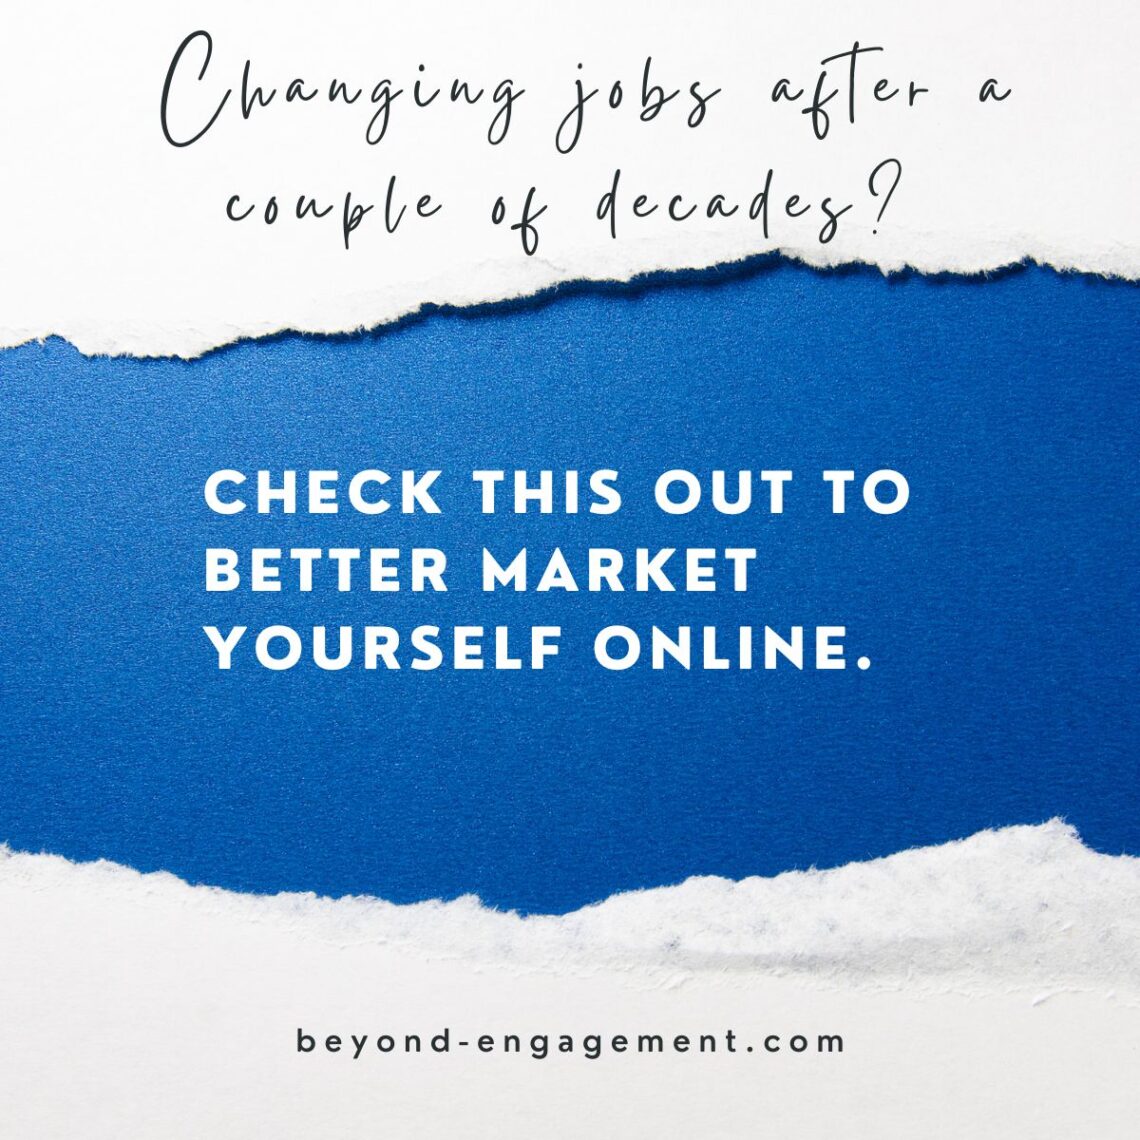 Changing jobs after a couple of decades? Check this out to better market yourself online.